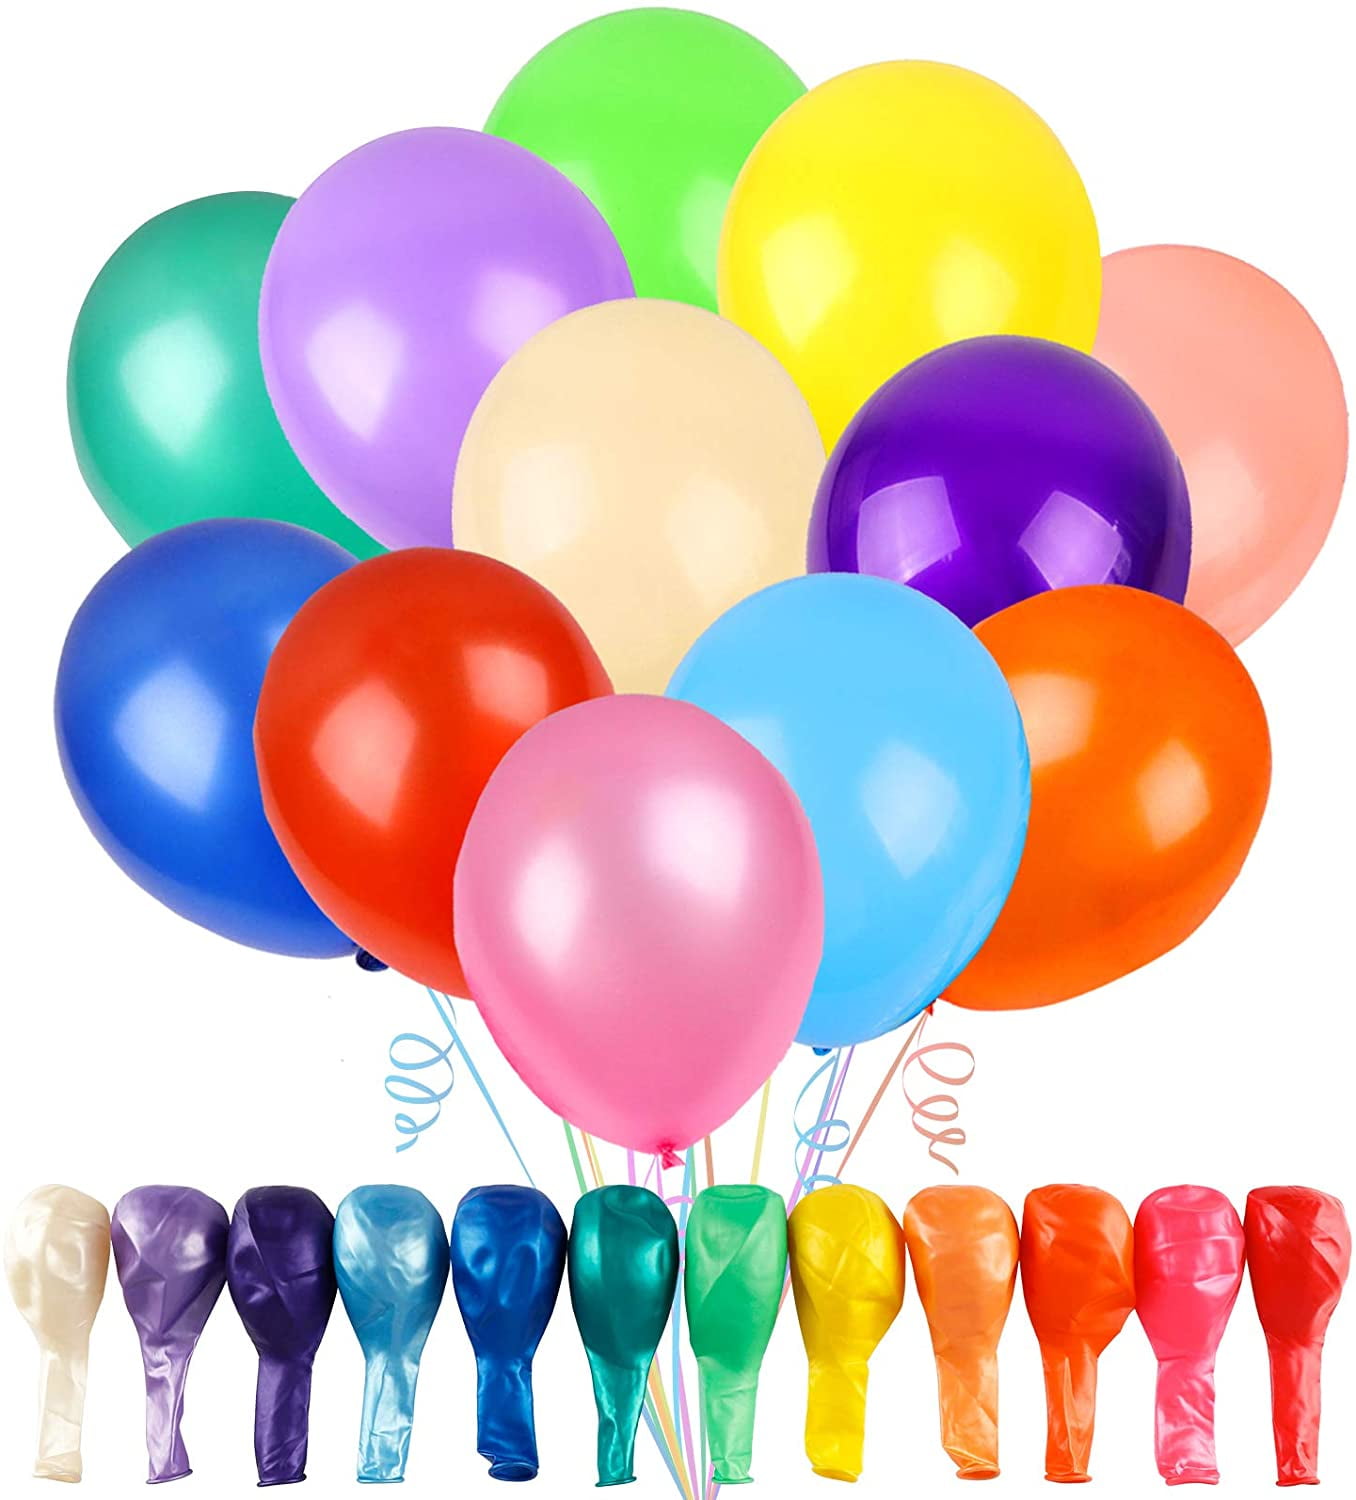 Pack of 50-12” Metallic Purple Latex Balloons for Birthday Party Decoration 